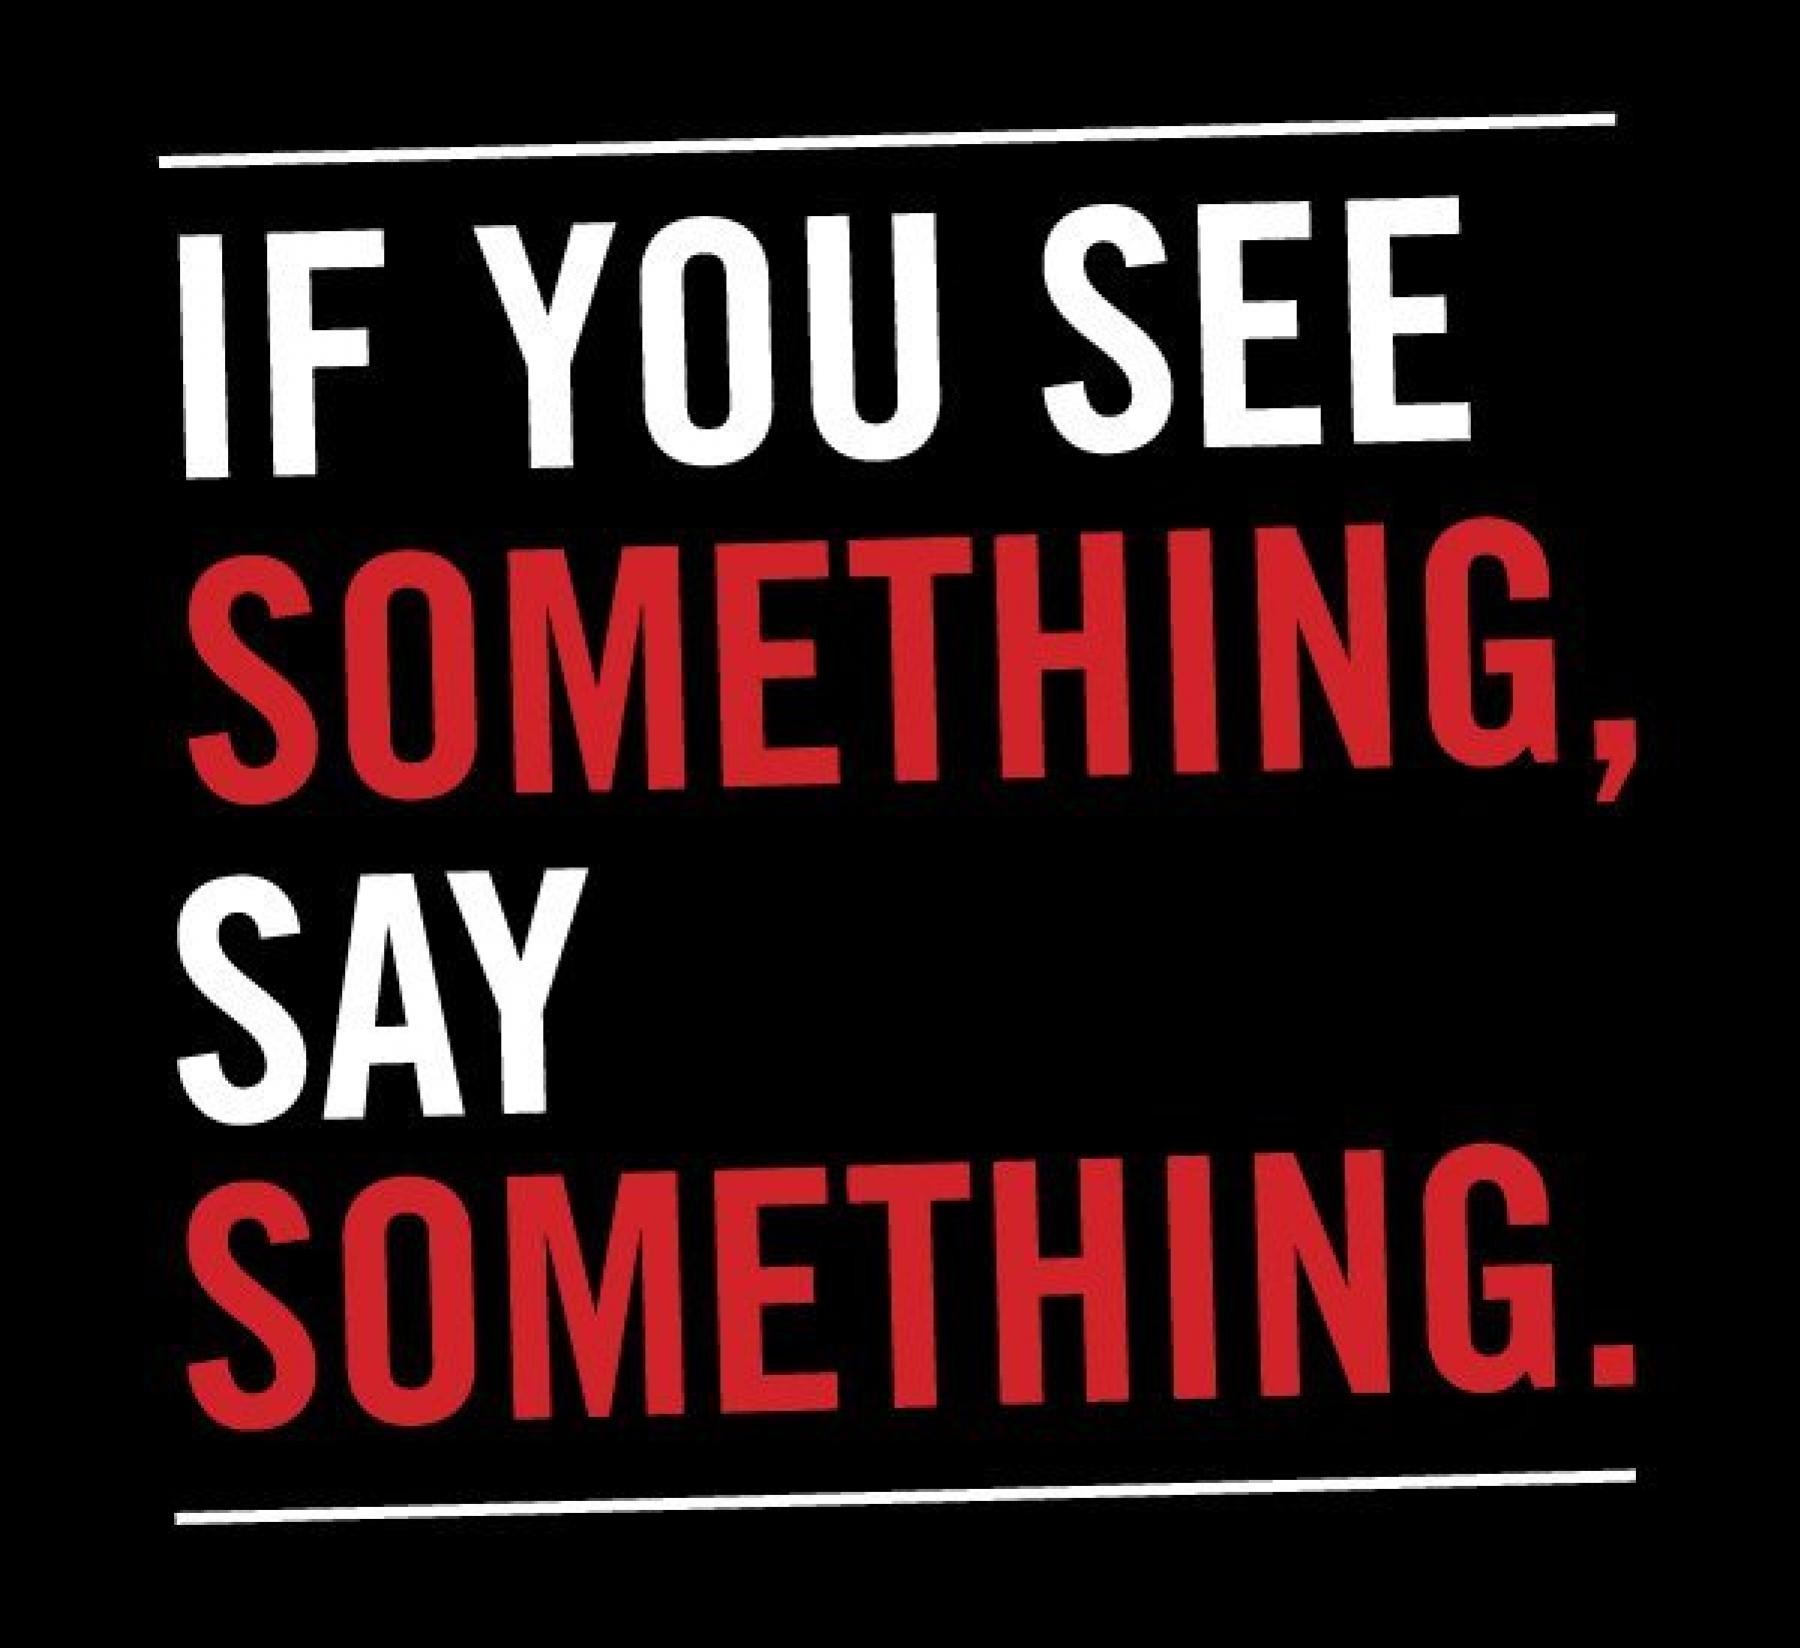 See something, say something encouraged | Article | The United States Army